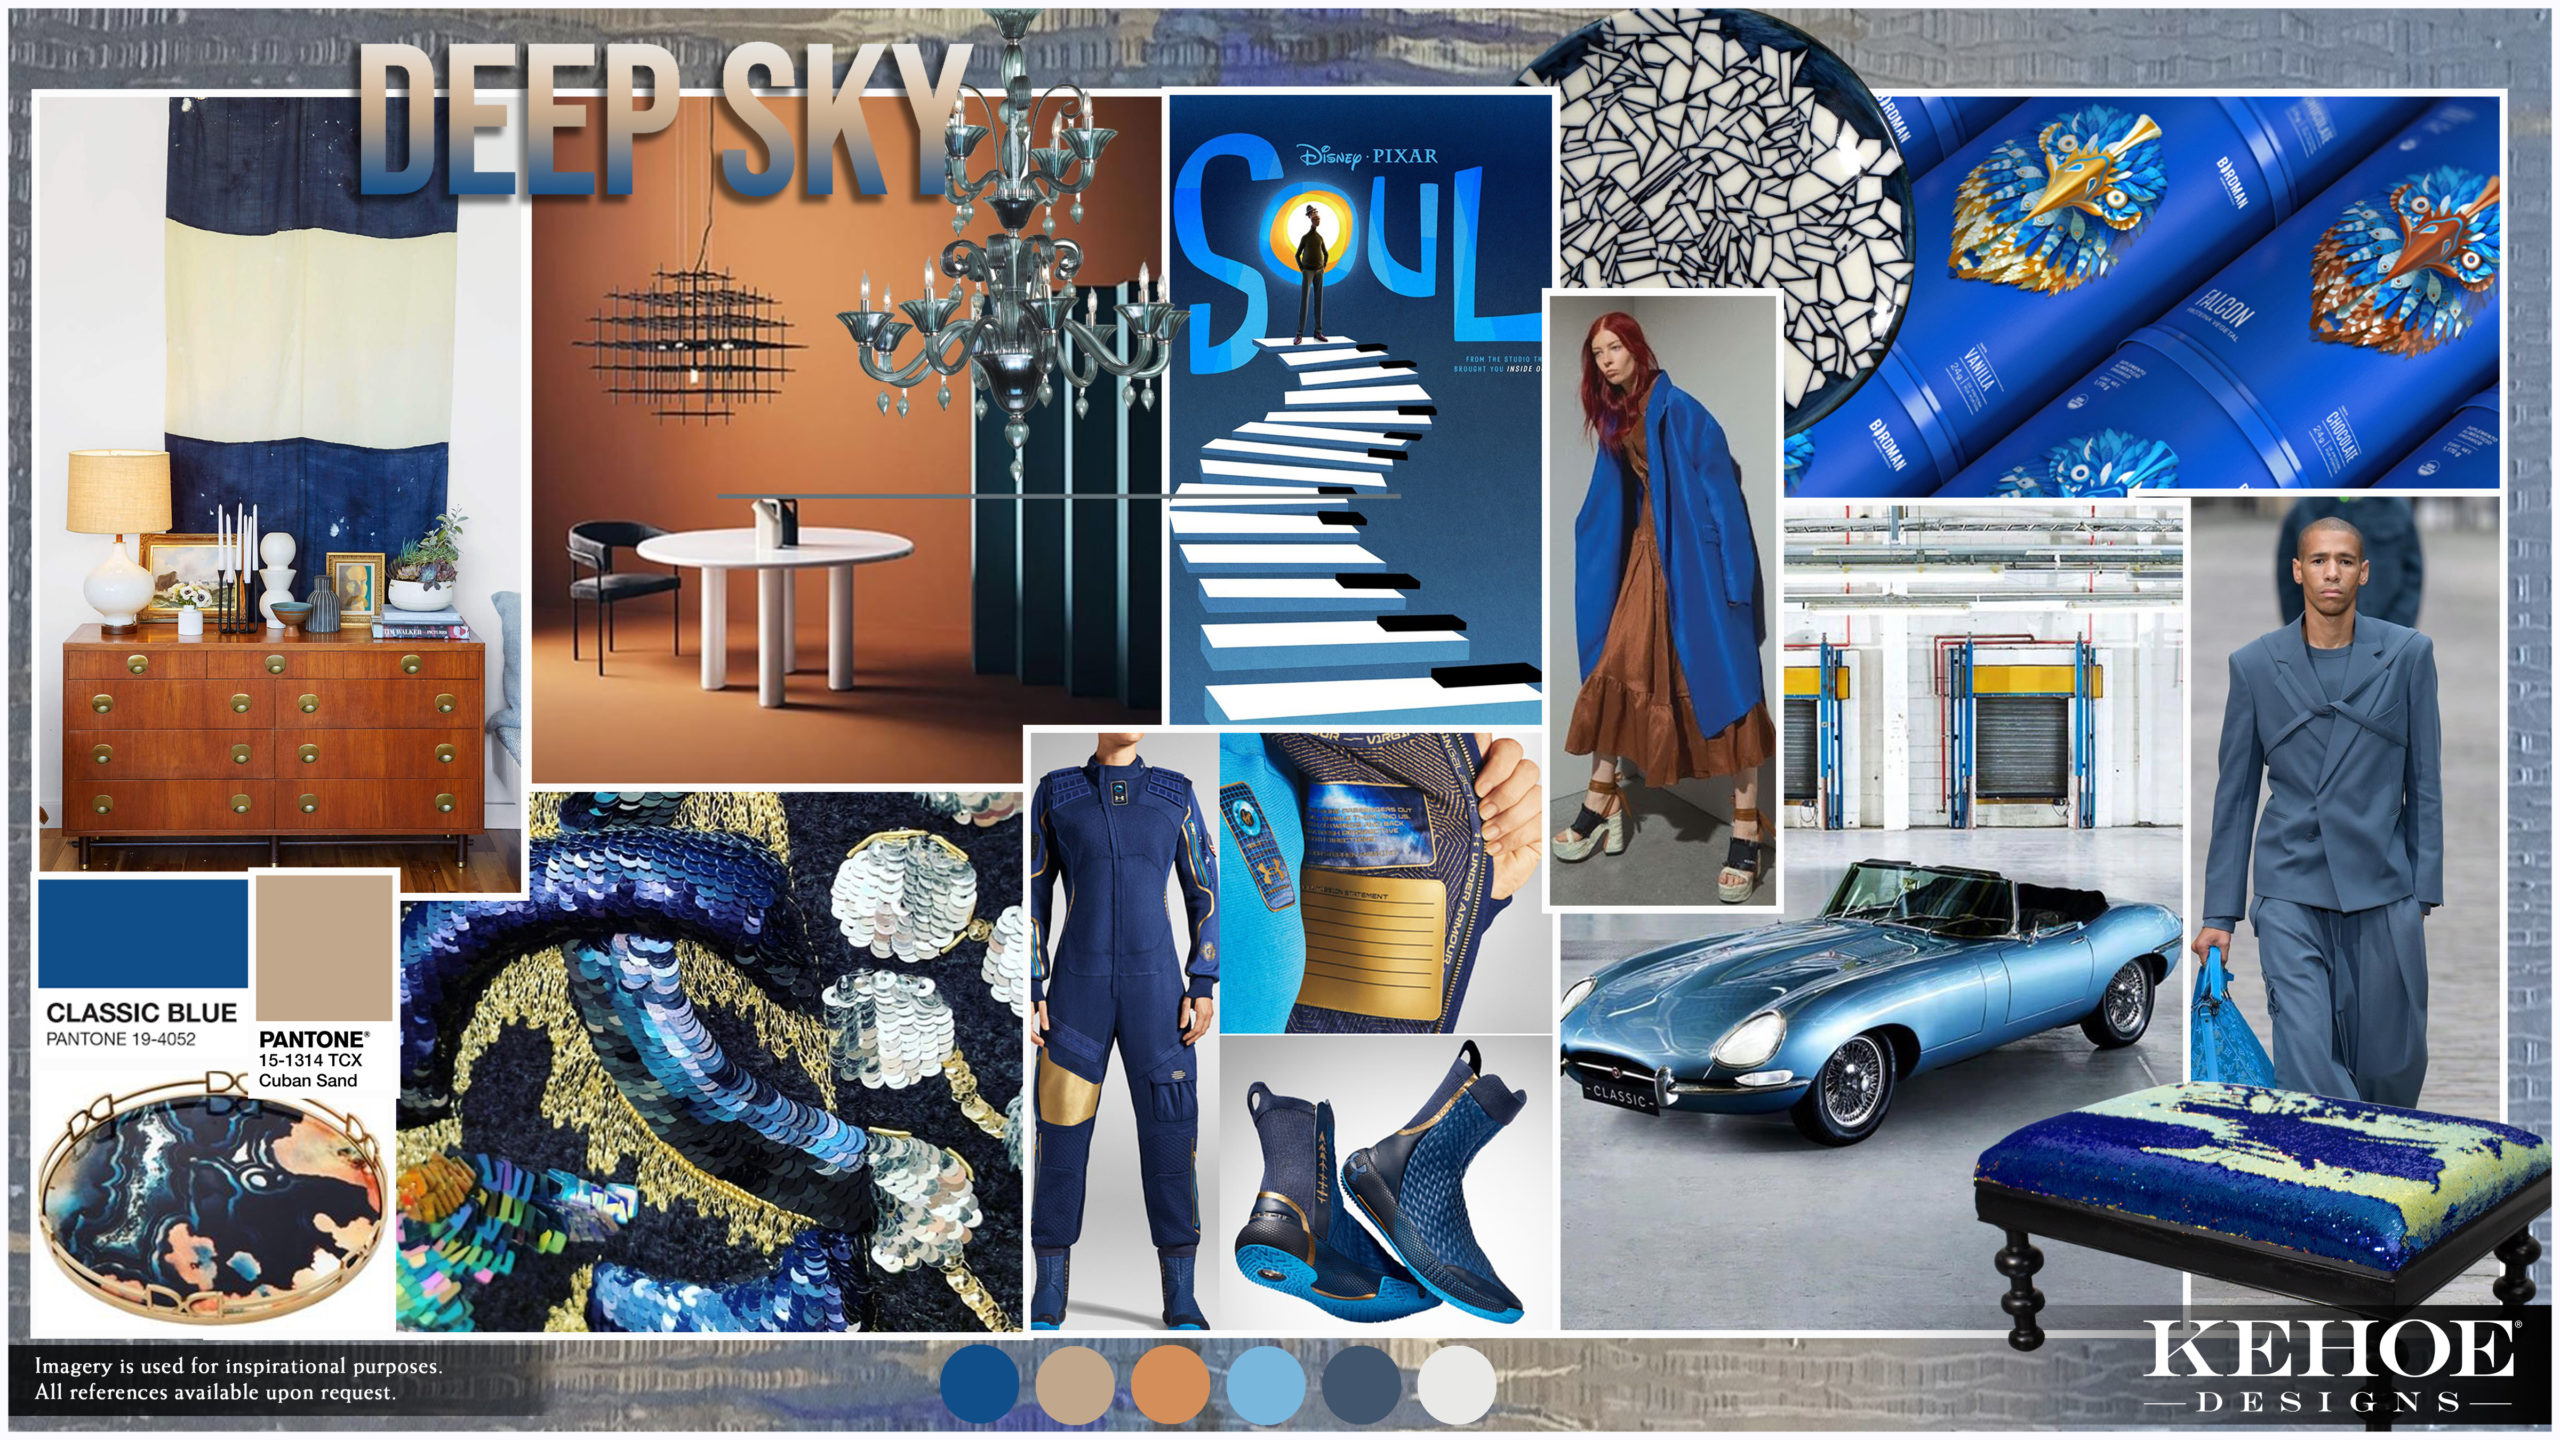 Kehoe Designs, Creative Services, Trend Board, Pantone Color of the Year, Classic Blue, Event Design, Event Decor, Chicago Events, Events Nationwide, Chicago Events, Event Inspiration, Industry Trends, Japenese Design, Culture